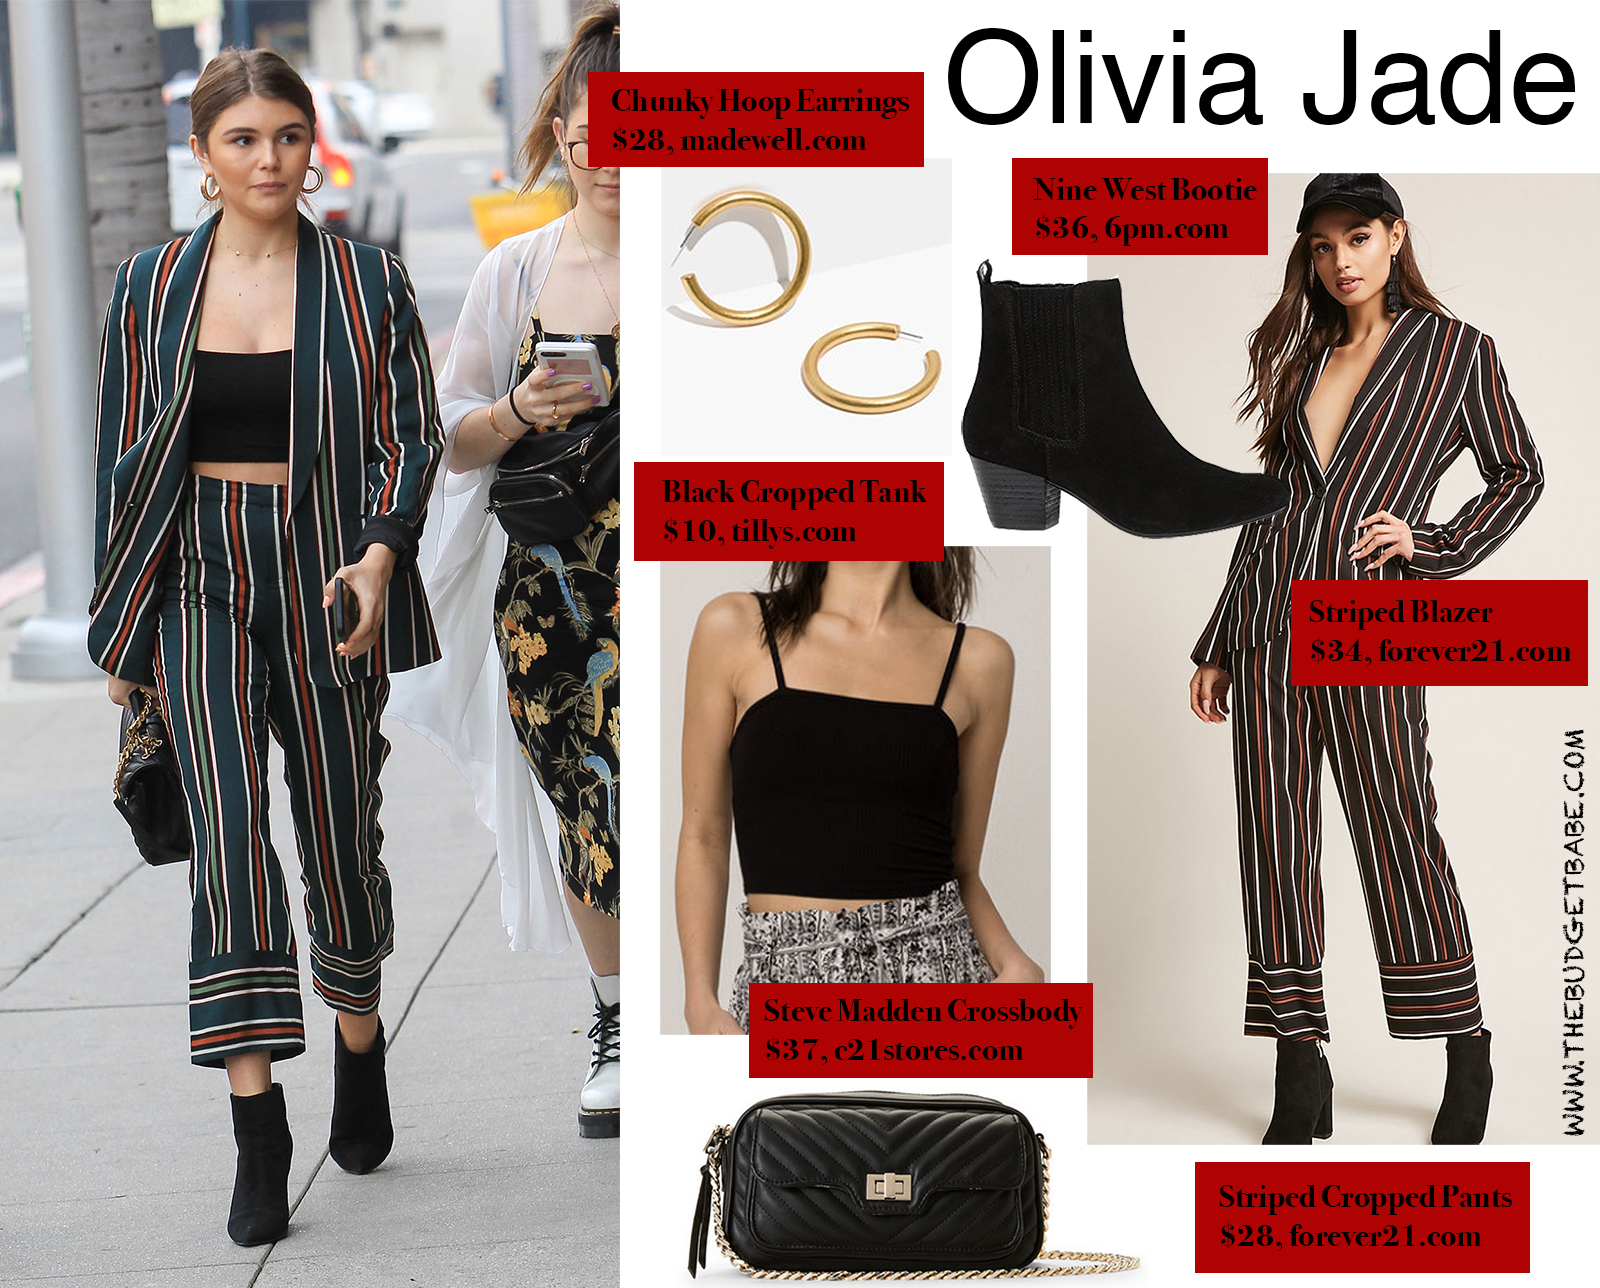 Olivia Jade Look for Less: Striped Blazer and Pants